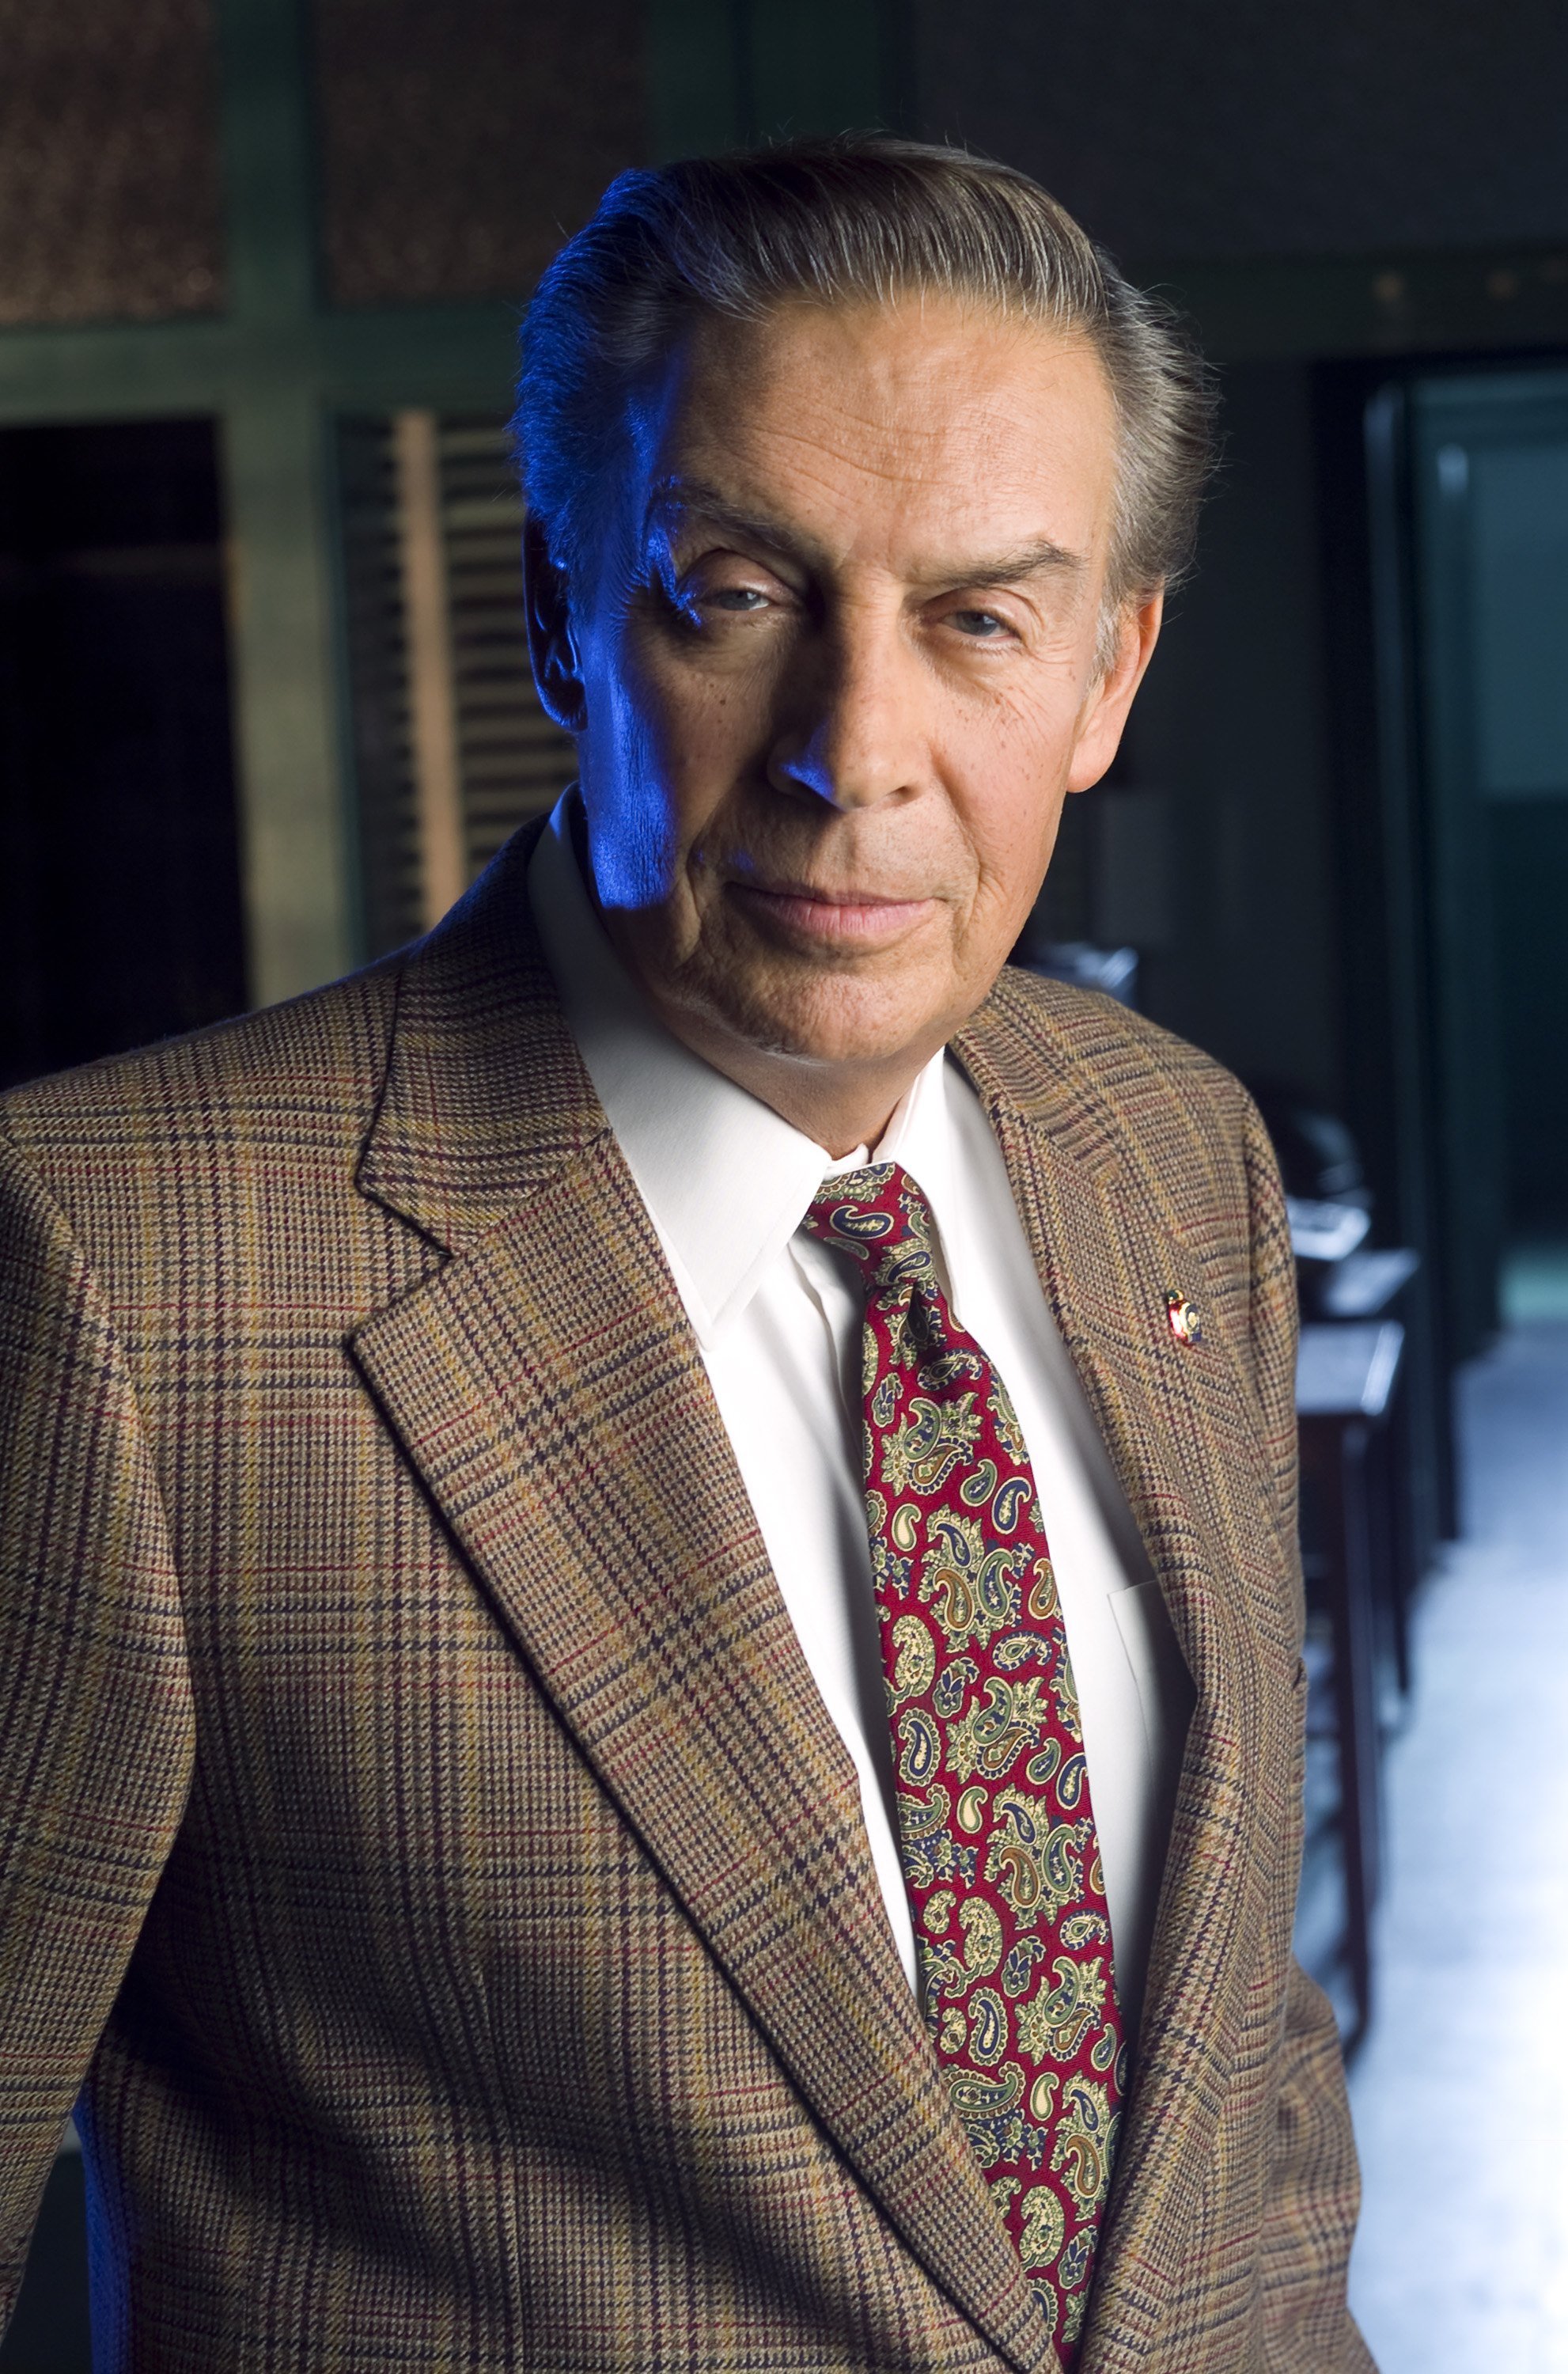 #39 Law Order #39 s Jerry Orbach Cut Kids Out of His Will in Favor of Wife